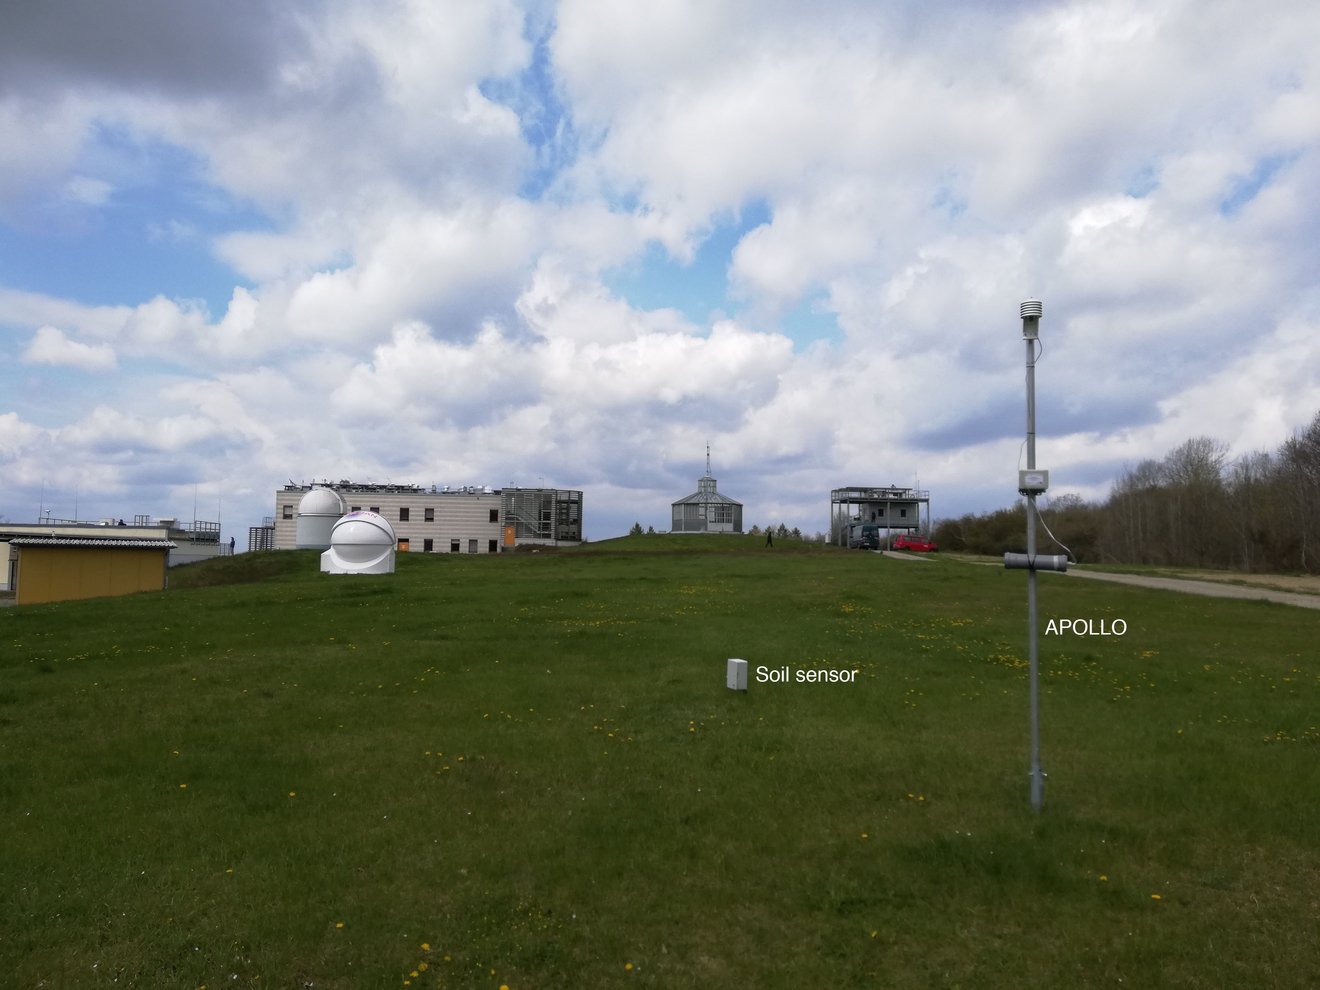 Meteorological observatory in Lindenberg in the background with an APOLLO station and a ground sensor in the foreground